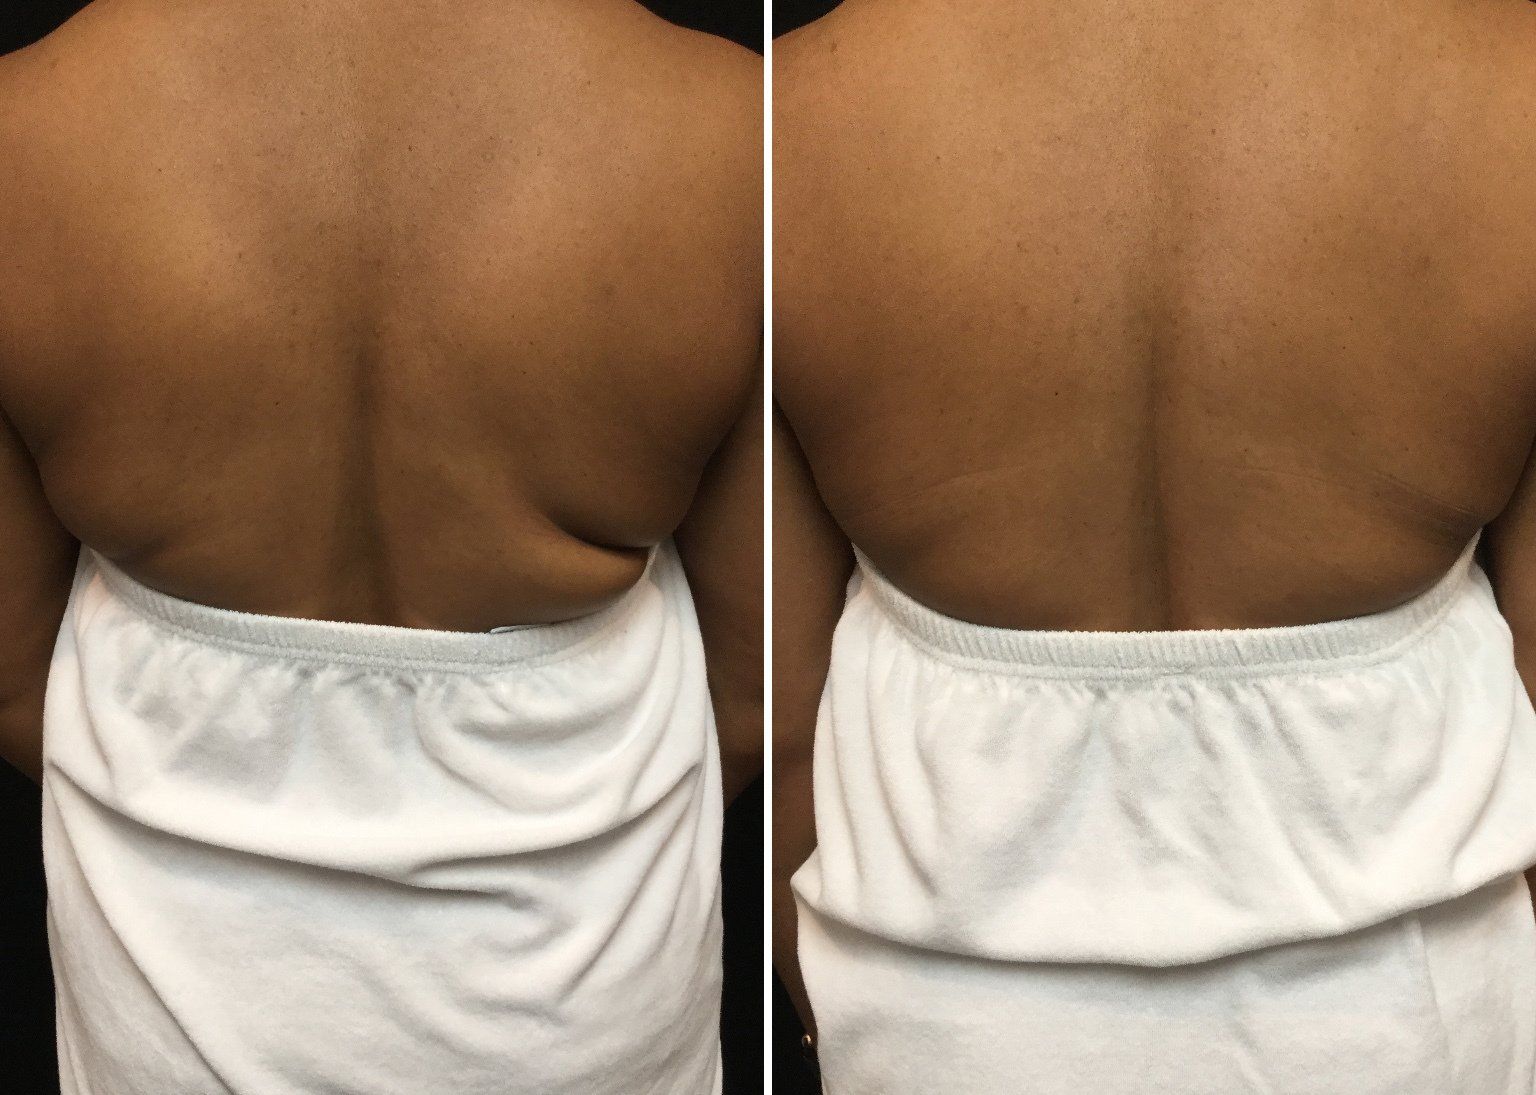 A before and after picture of a woman 's back